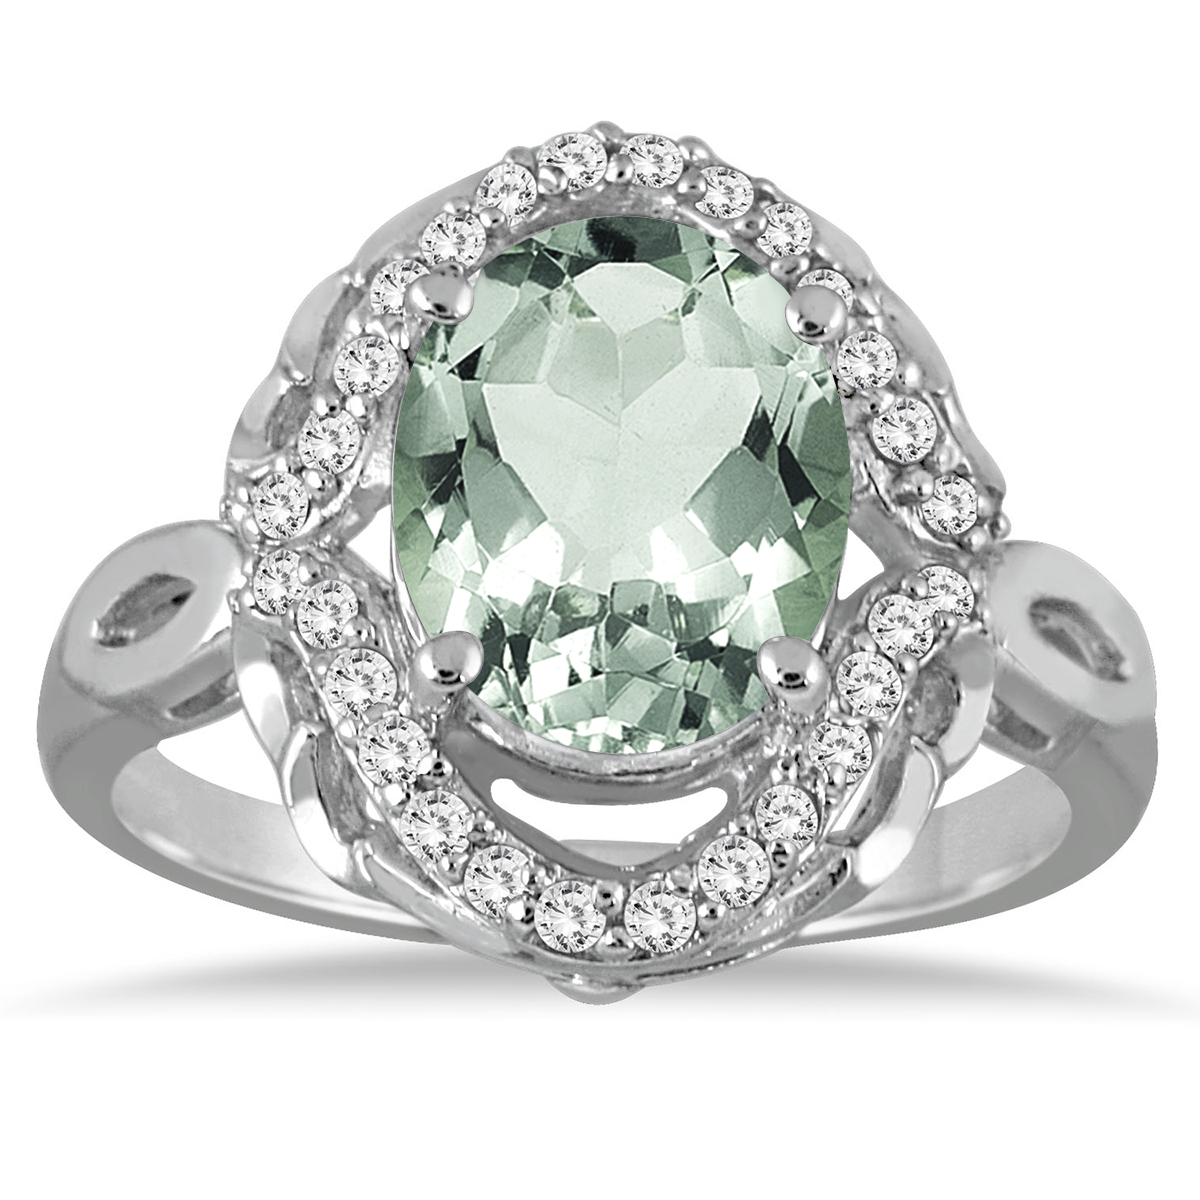 3 1/2 Carat Oval Green Amethyst and Diamond Ring in 10K White Gold